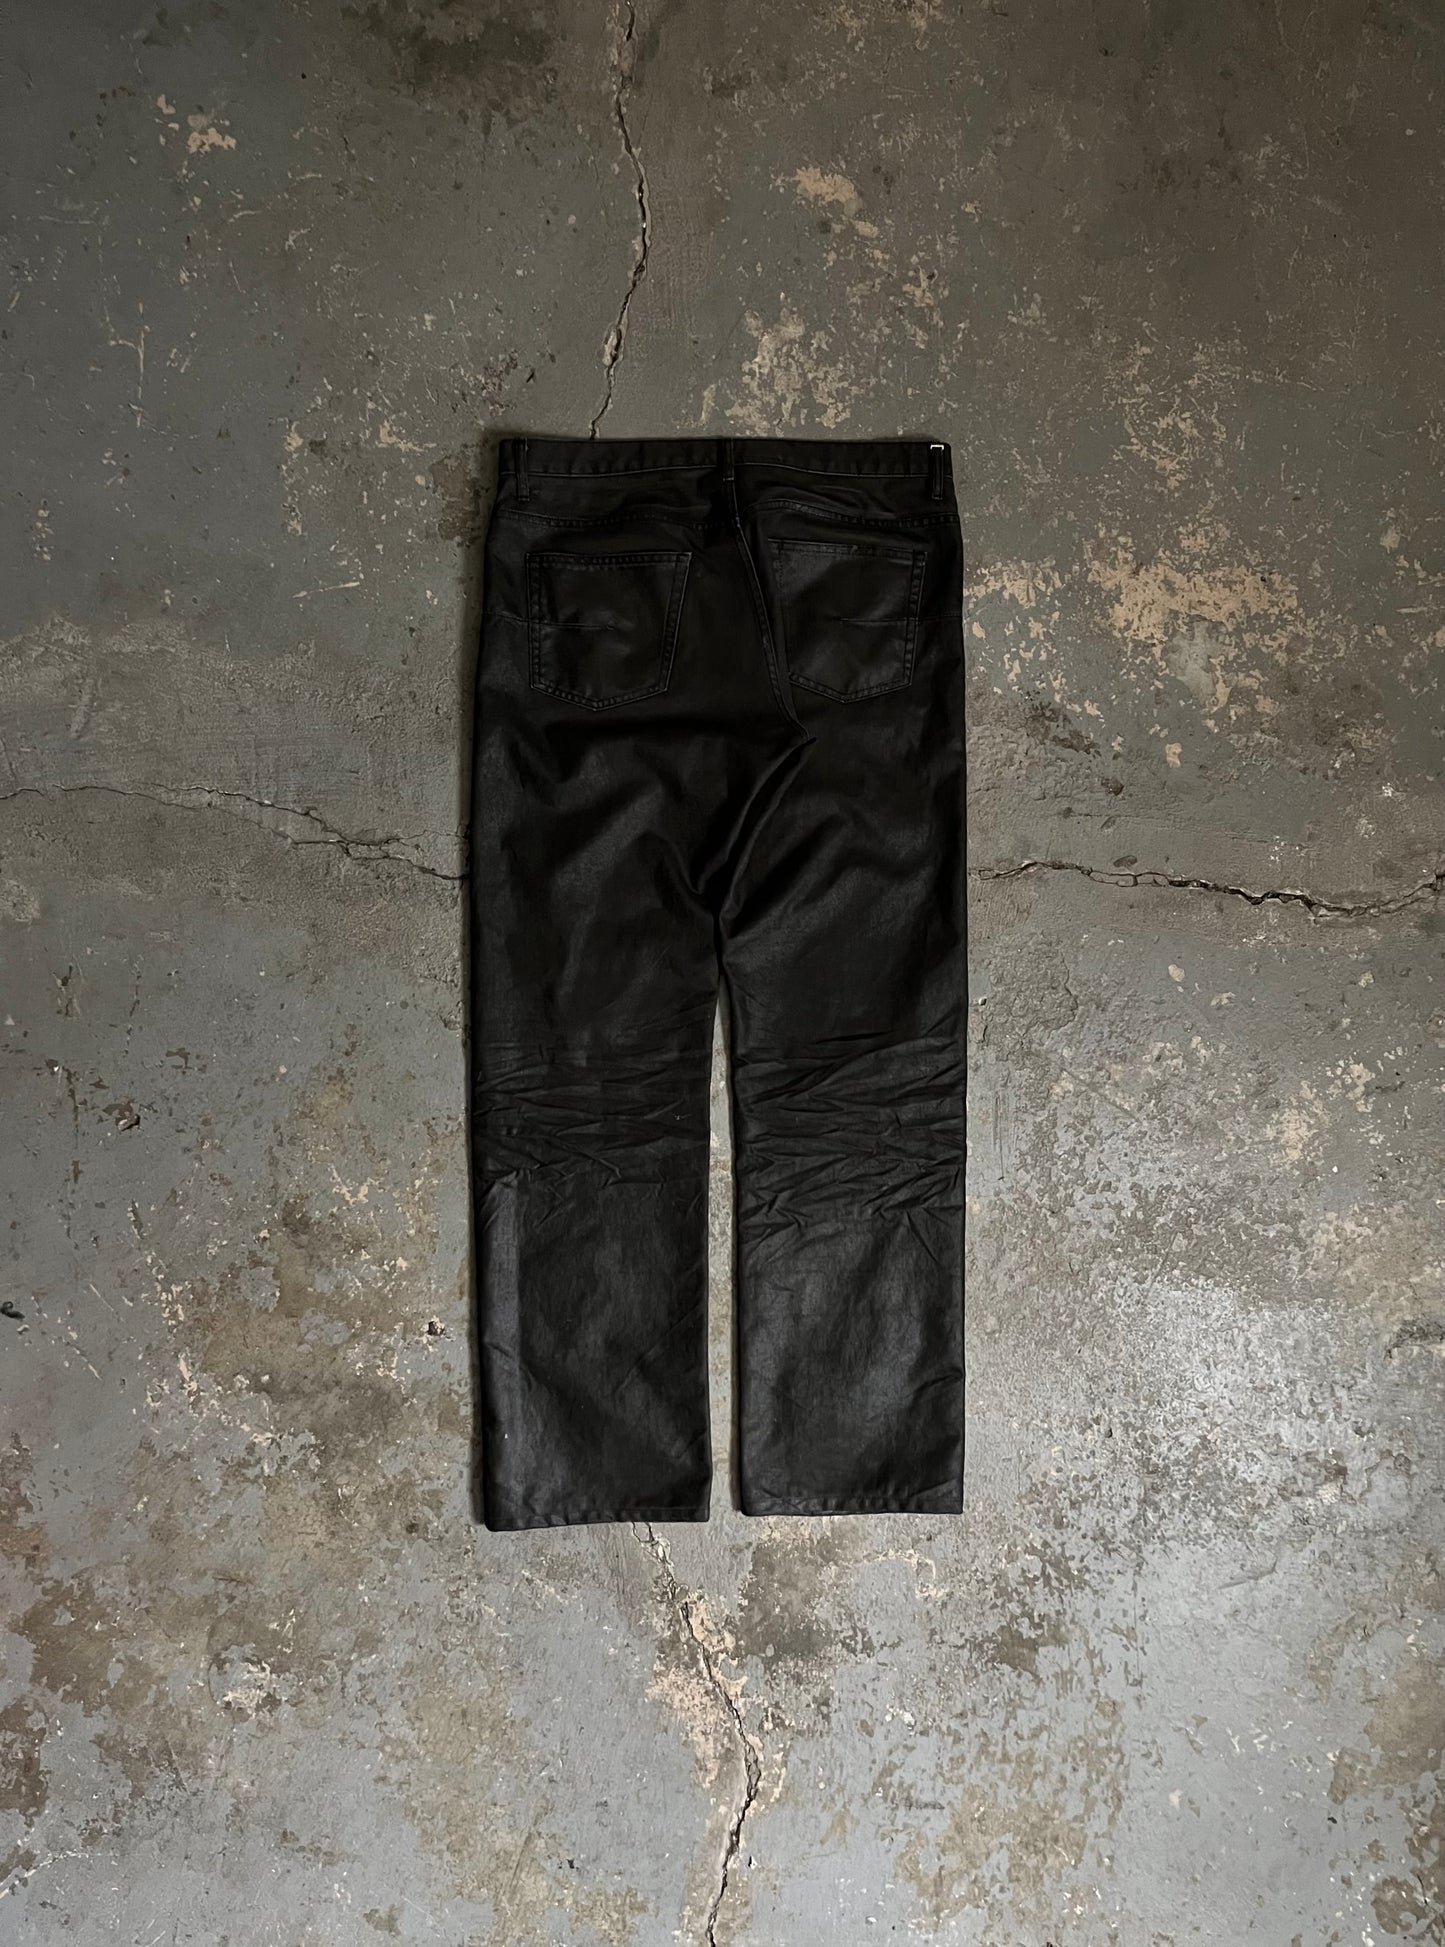 Dior AW03 “Luster” Waxed Pants